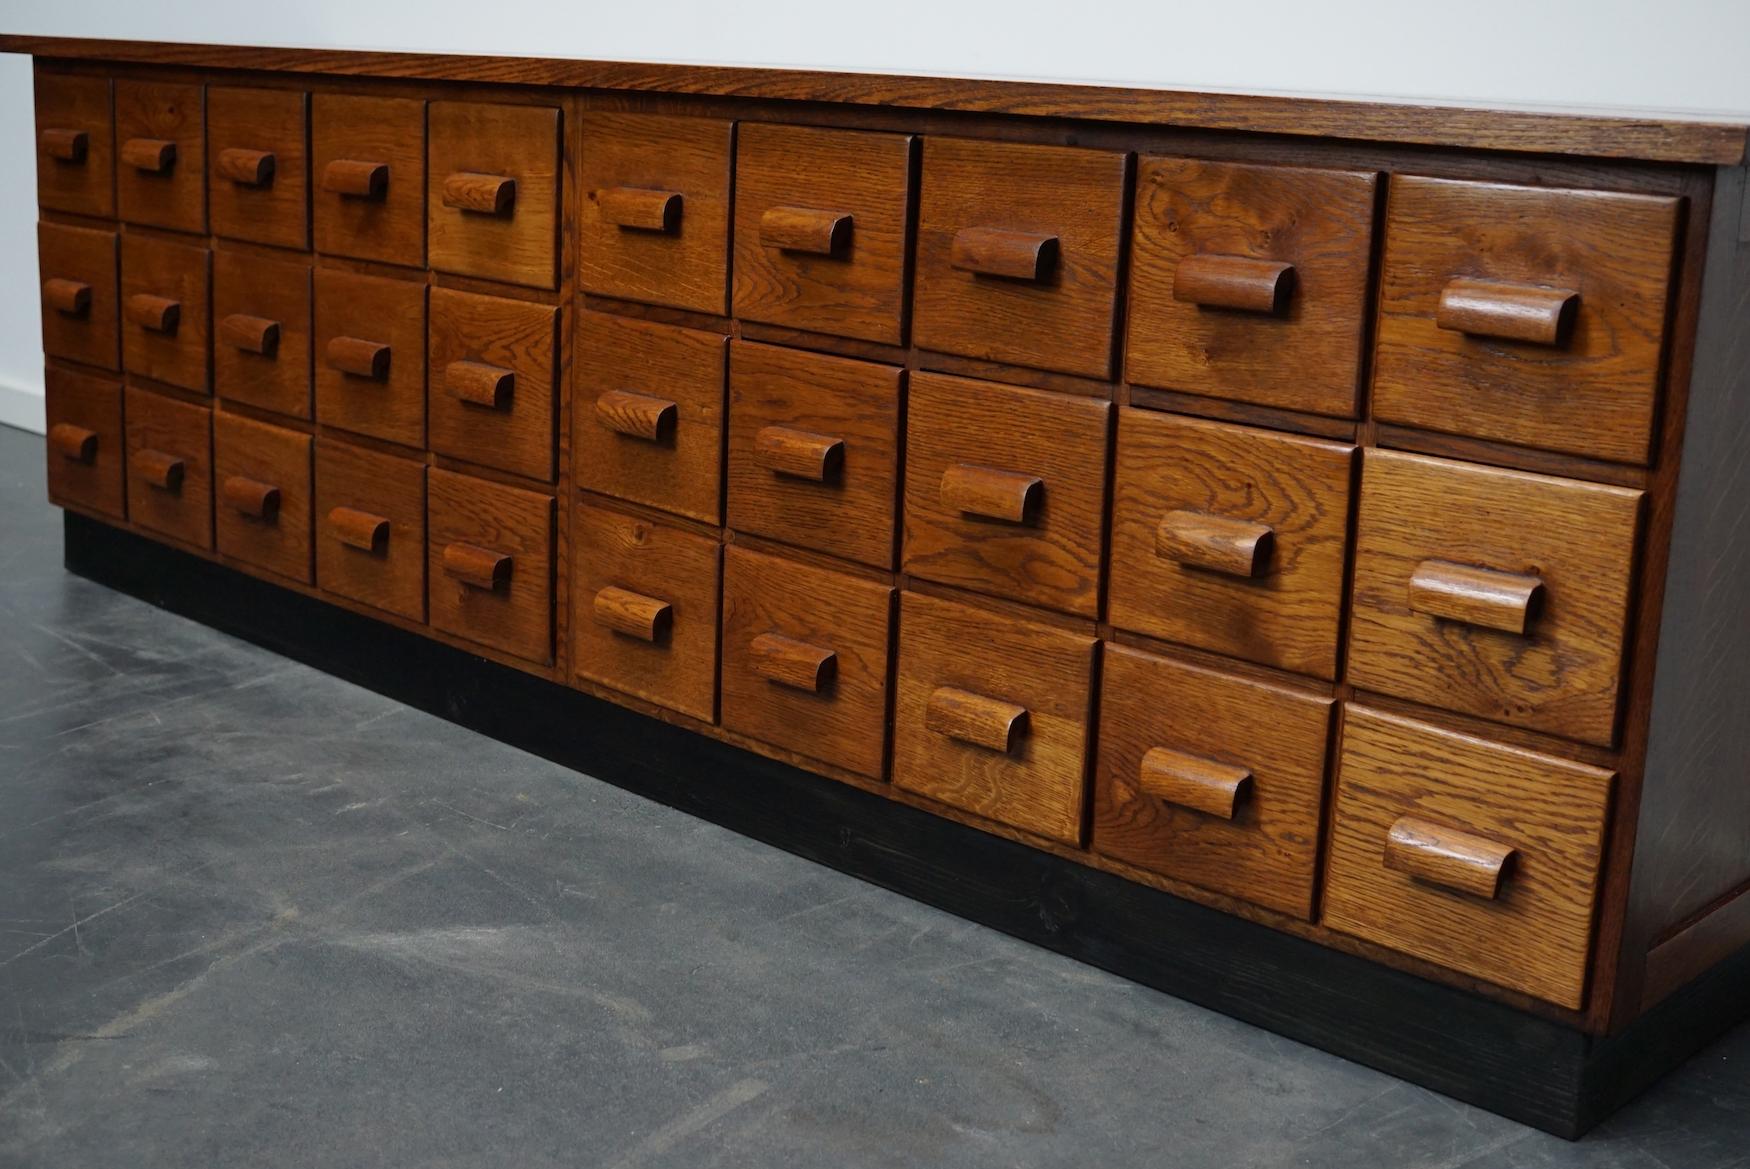 This apothecary cabinet was made circa 1940s in Germany. It features 30 drawers with oak handles. The interior dimensions of the drawers are: D x W x H 33 x 15.5 x 13 cm.